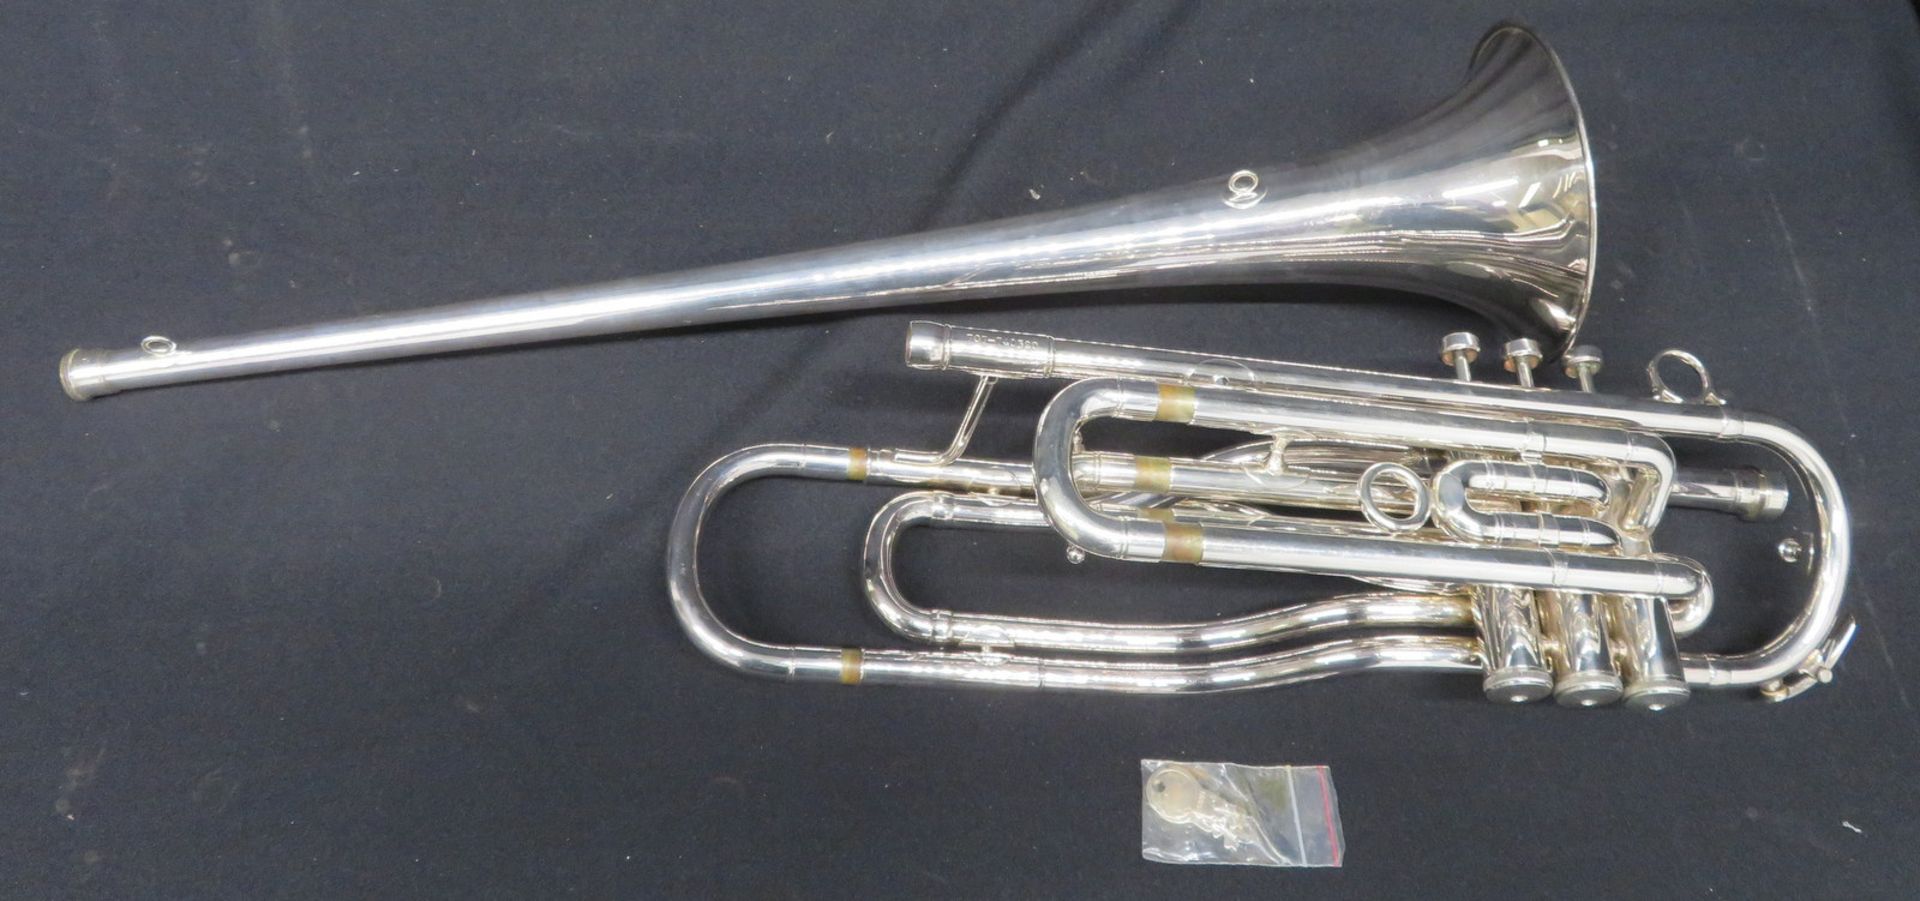 Boosey & Hawkes Besson 700 London tenor fanfare trumpet with case. Serial number: 707-740320. - Image 17 of 19